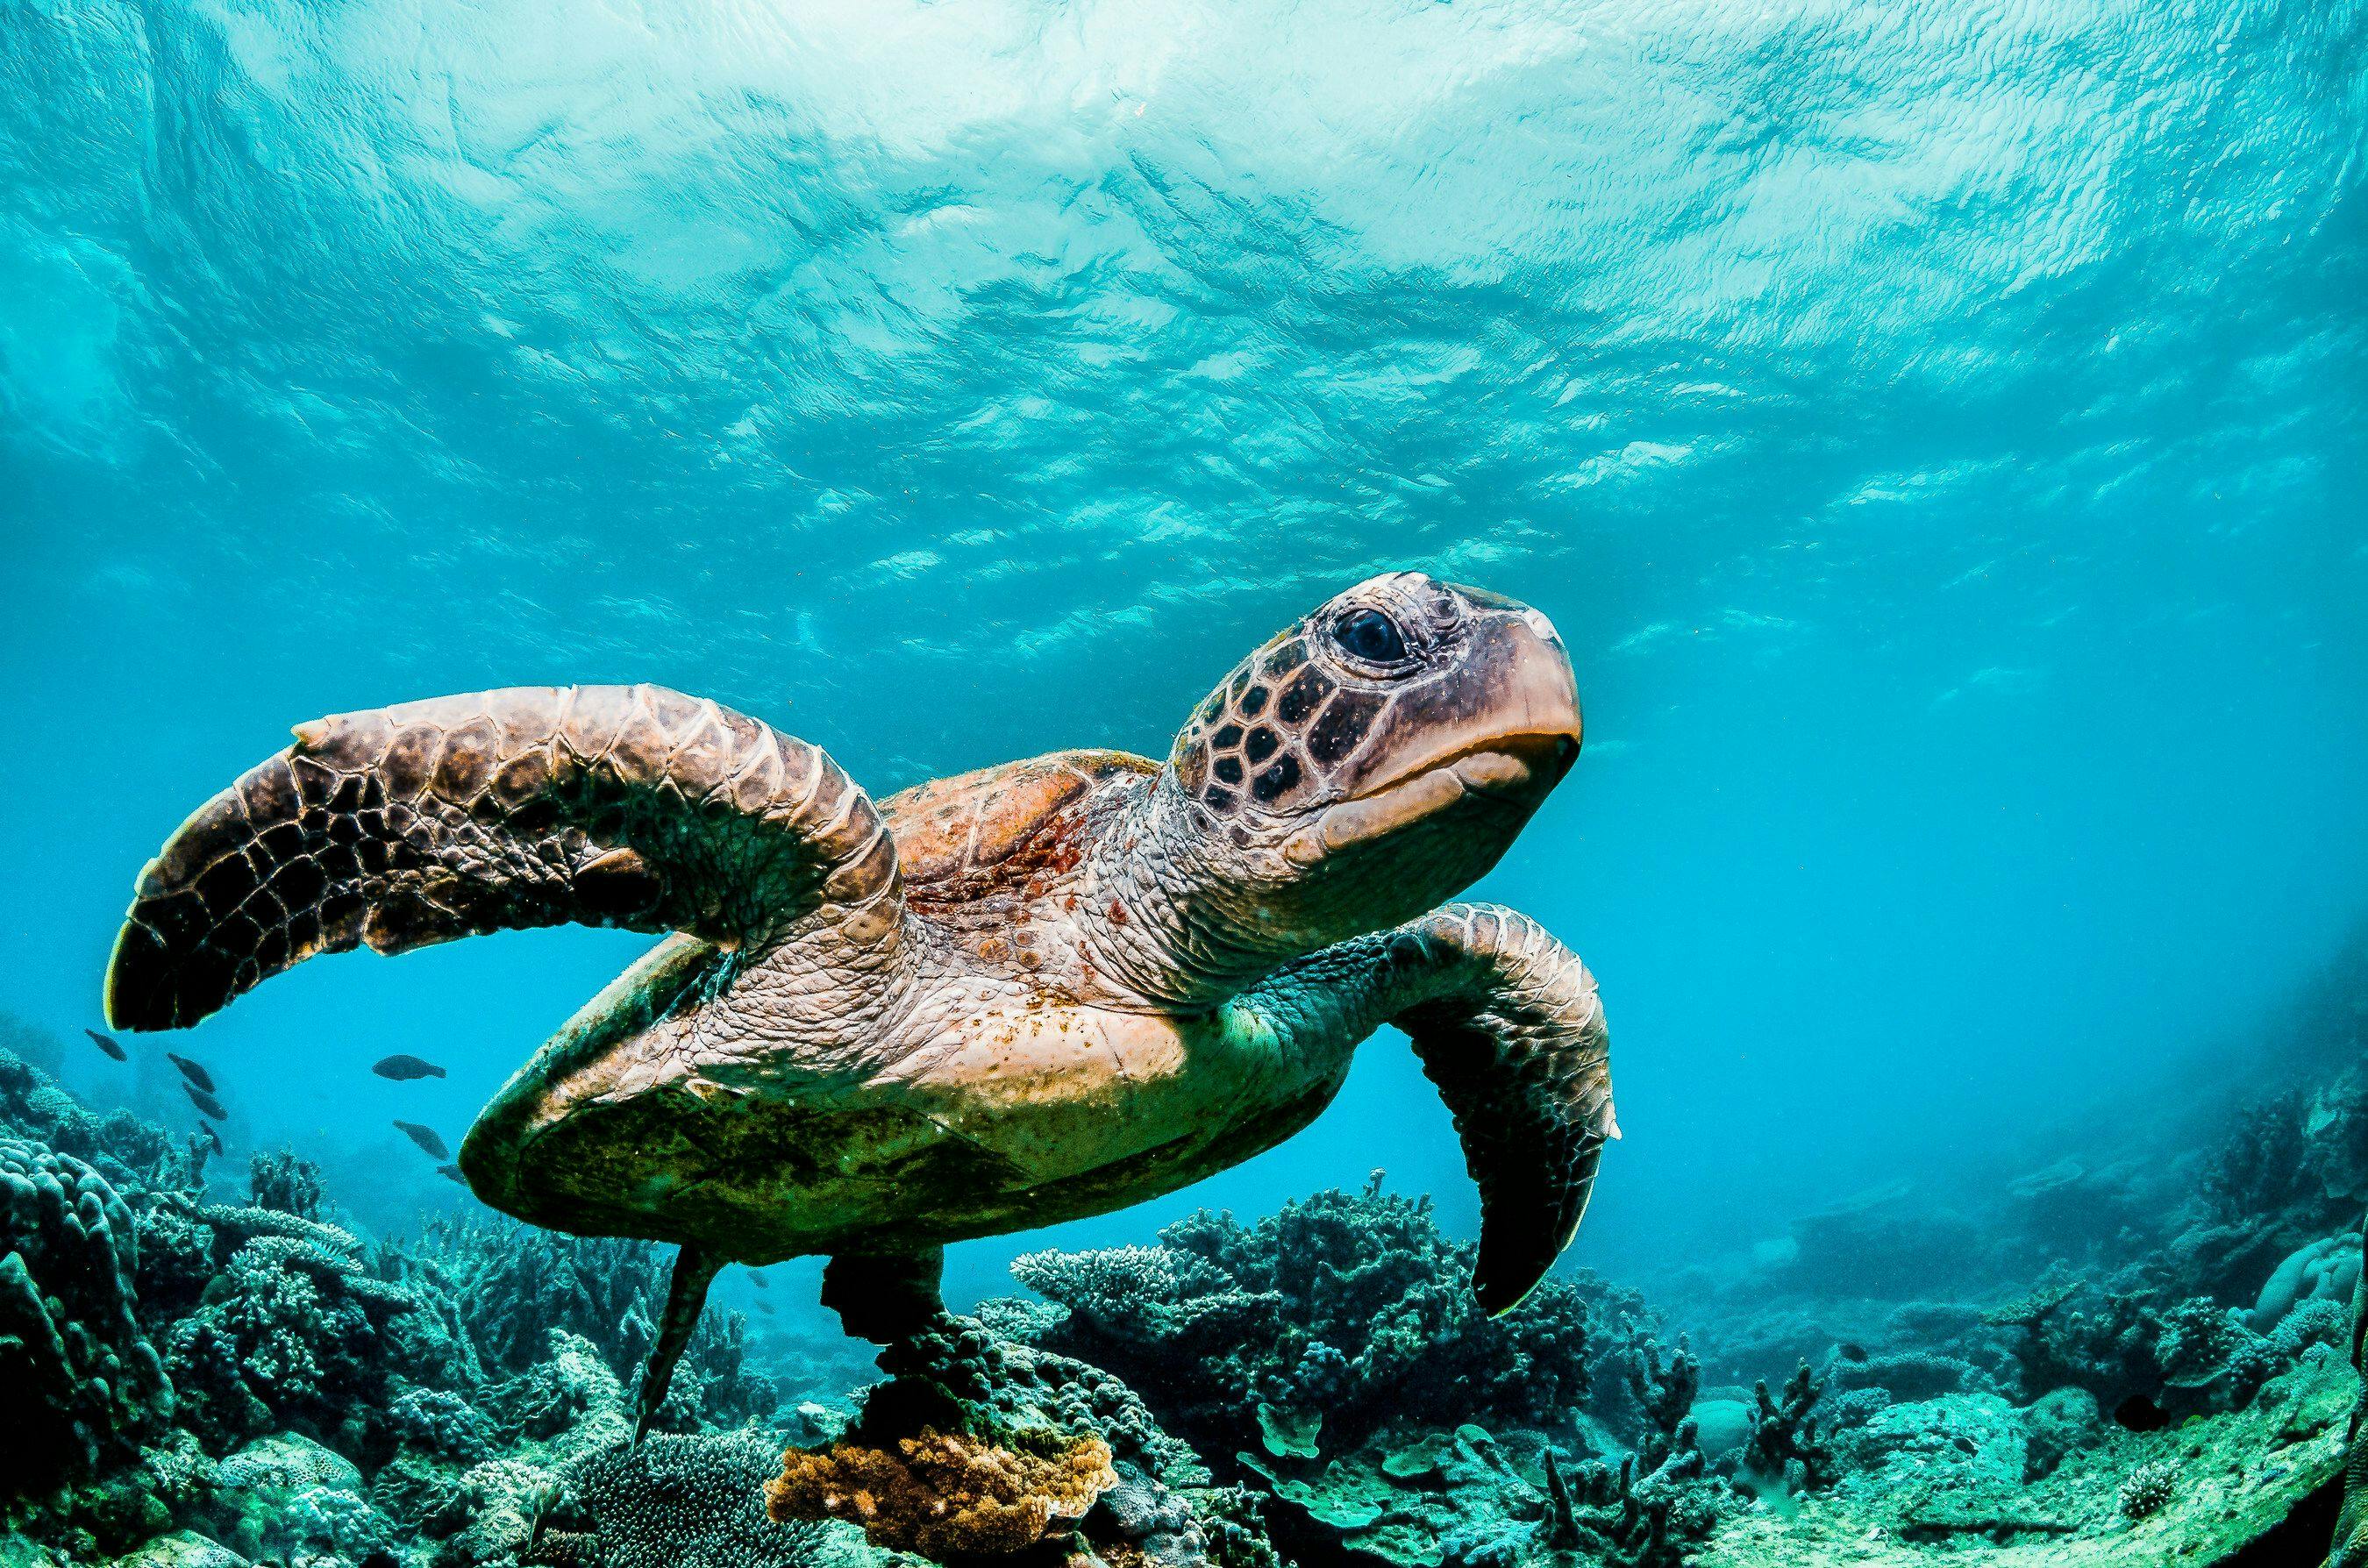 Artificial intelligence used to protect sea turtles in the Galapagos